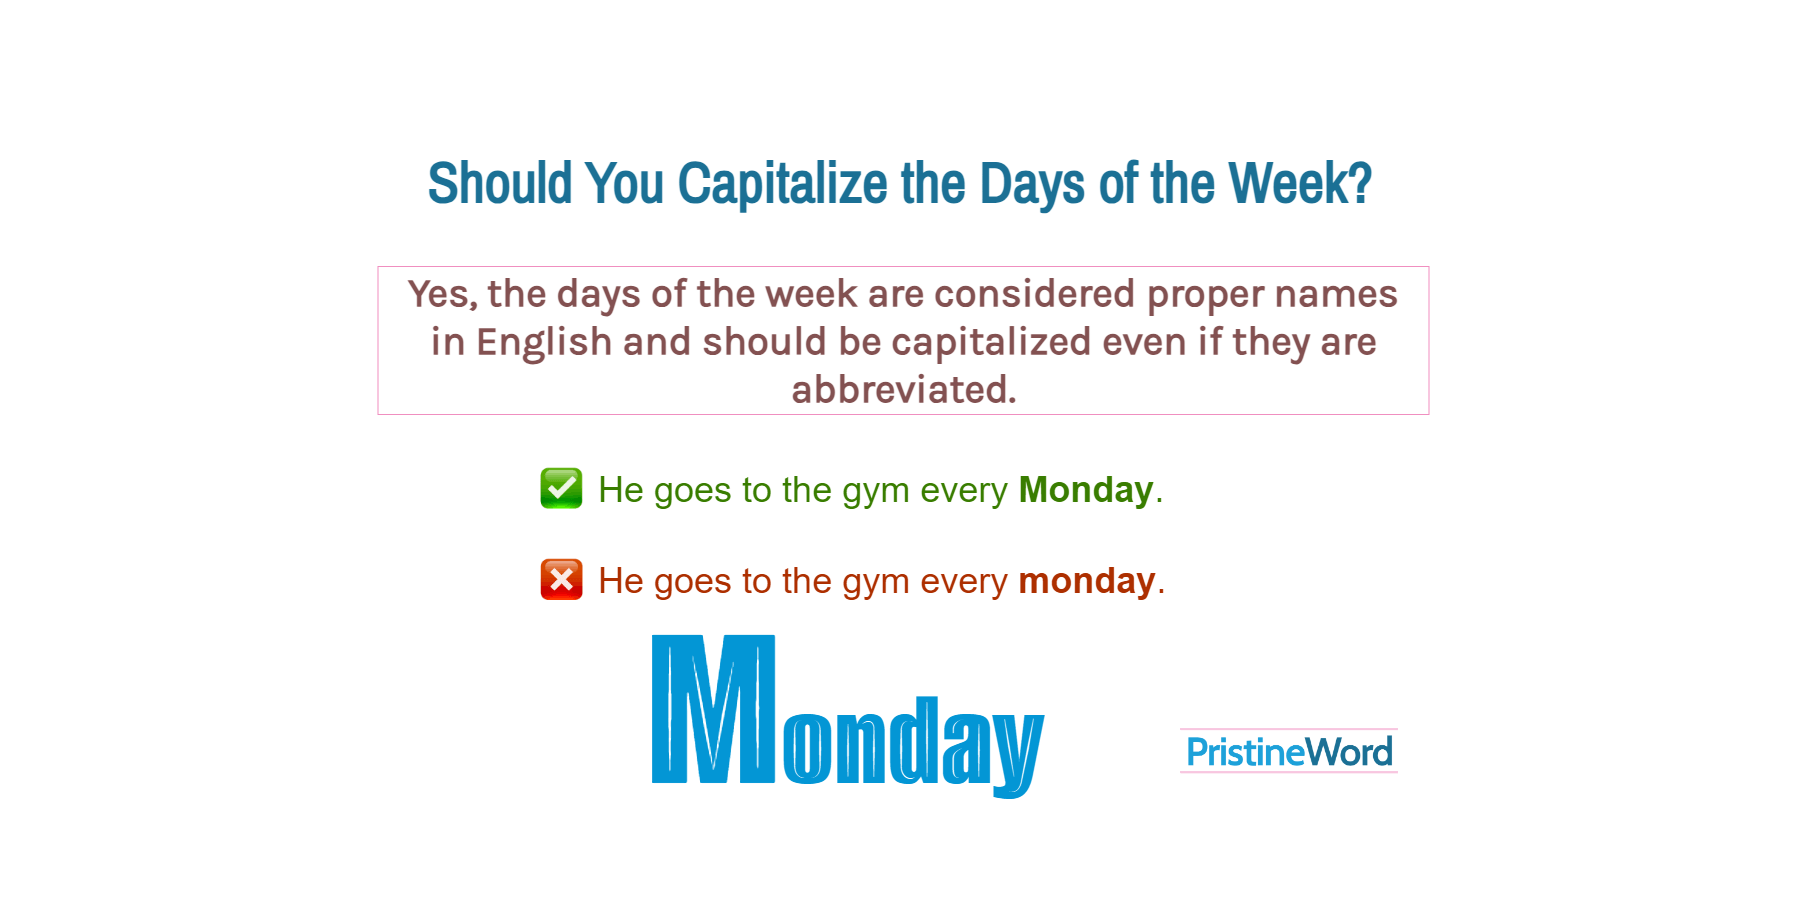 Should You Capitalize the Days of the Week?